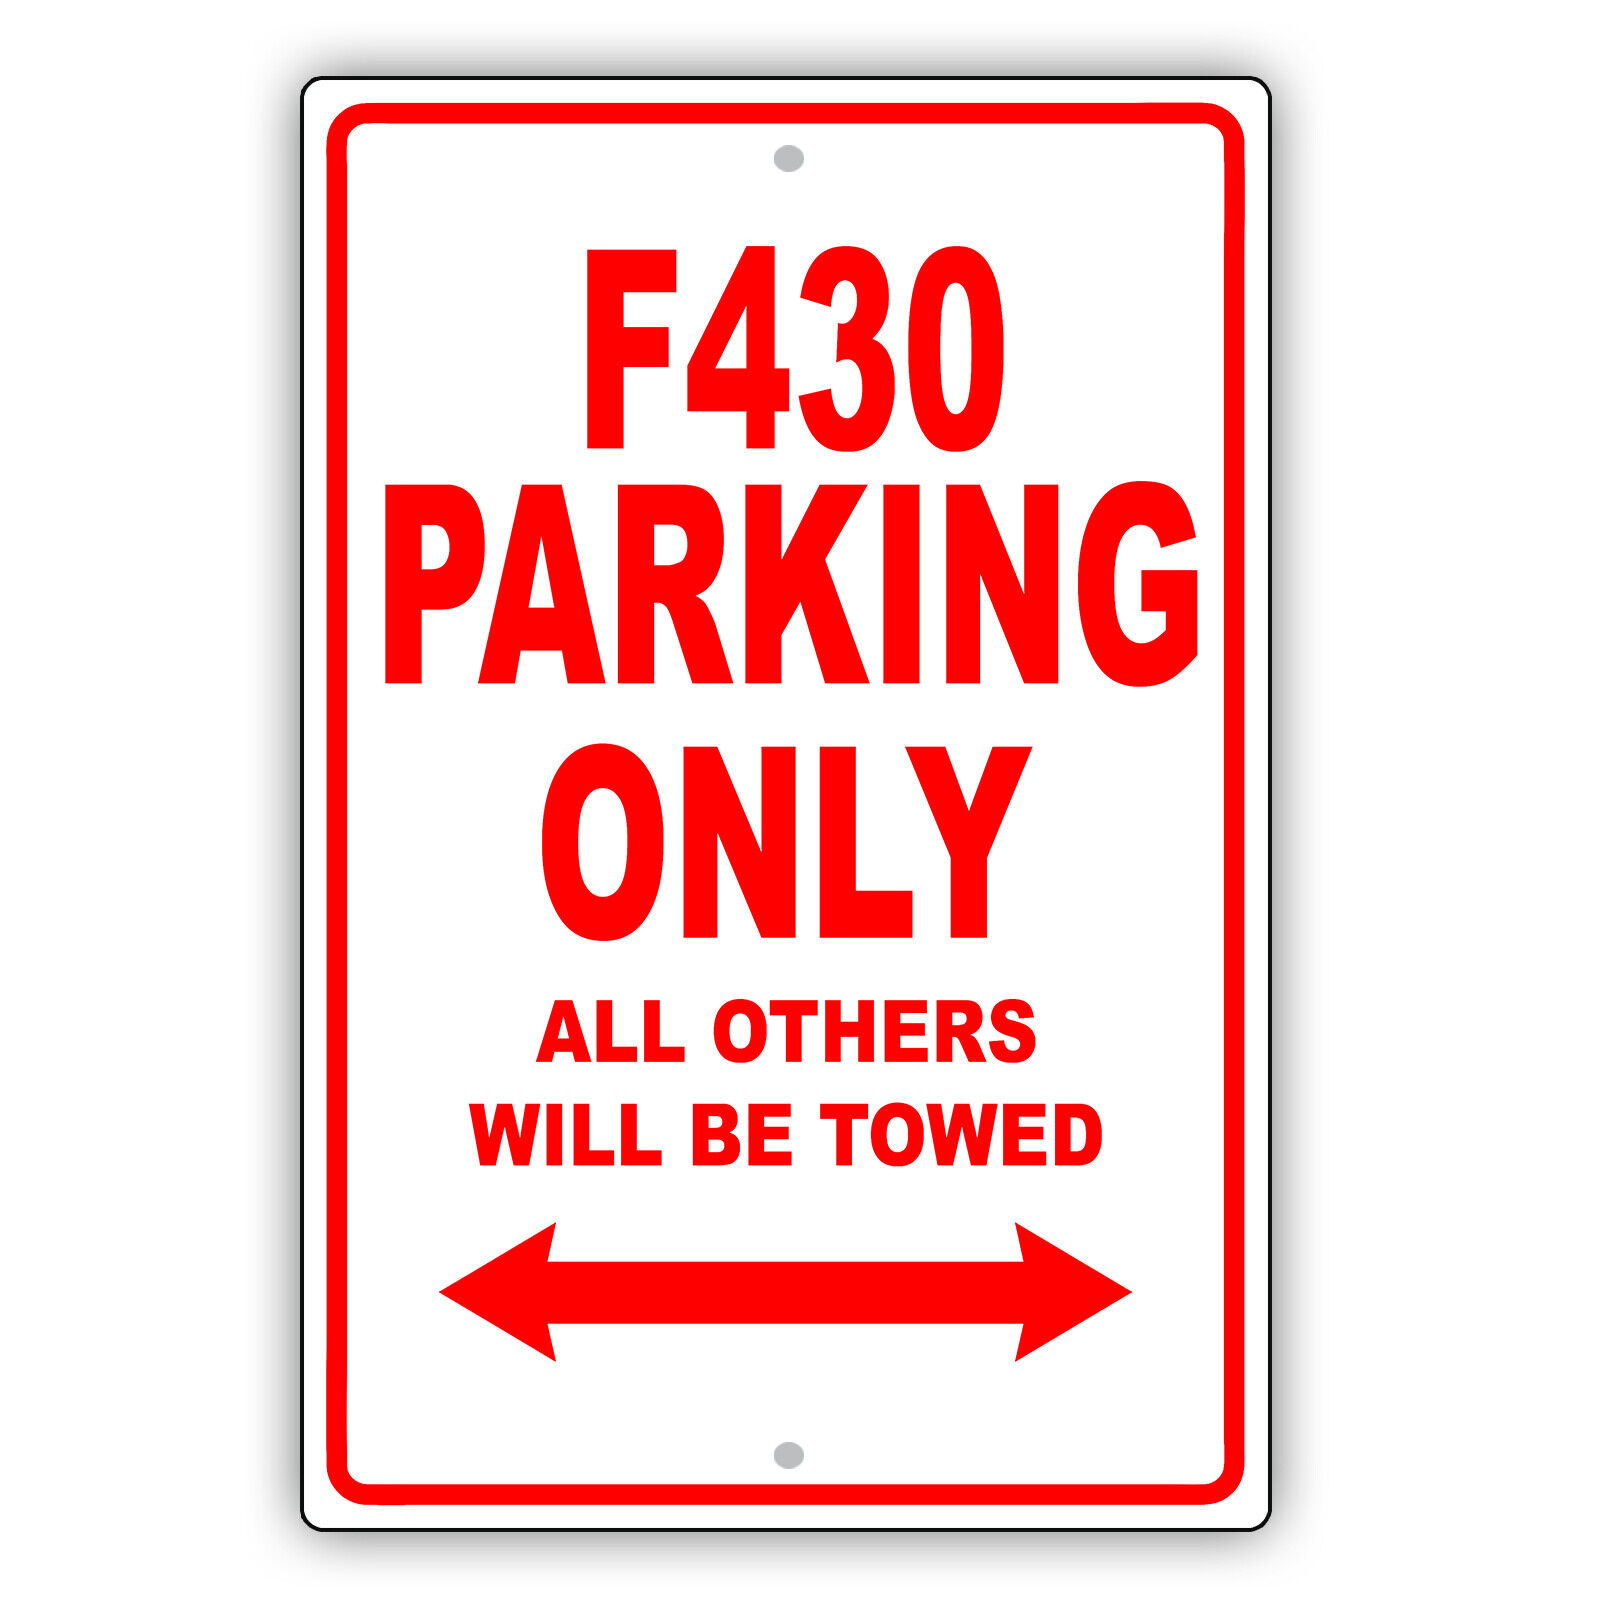 F430 Parking Only All Others Will be Towed Novelty Garage Aluminum Metal Sign